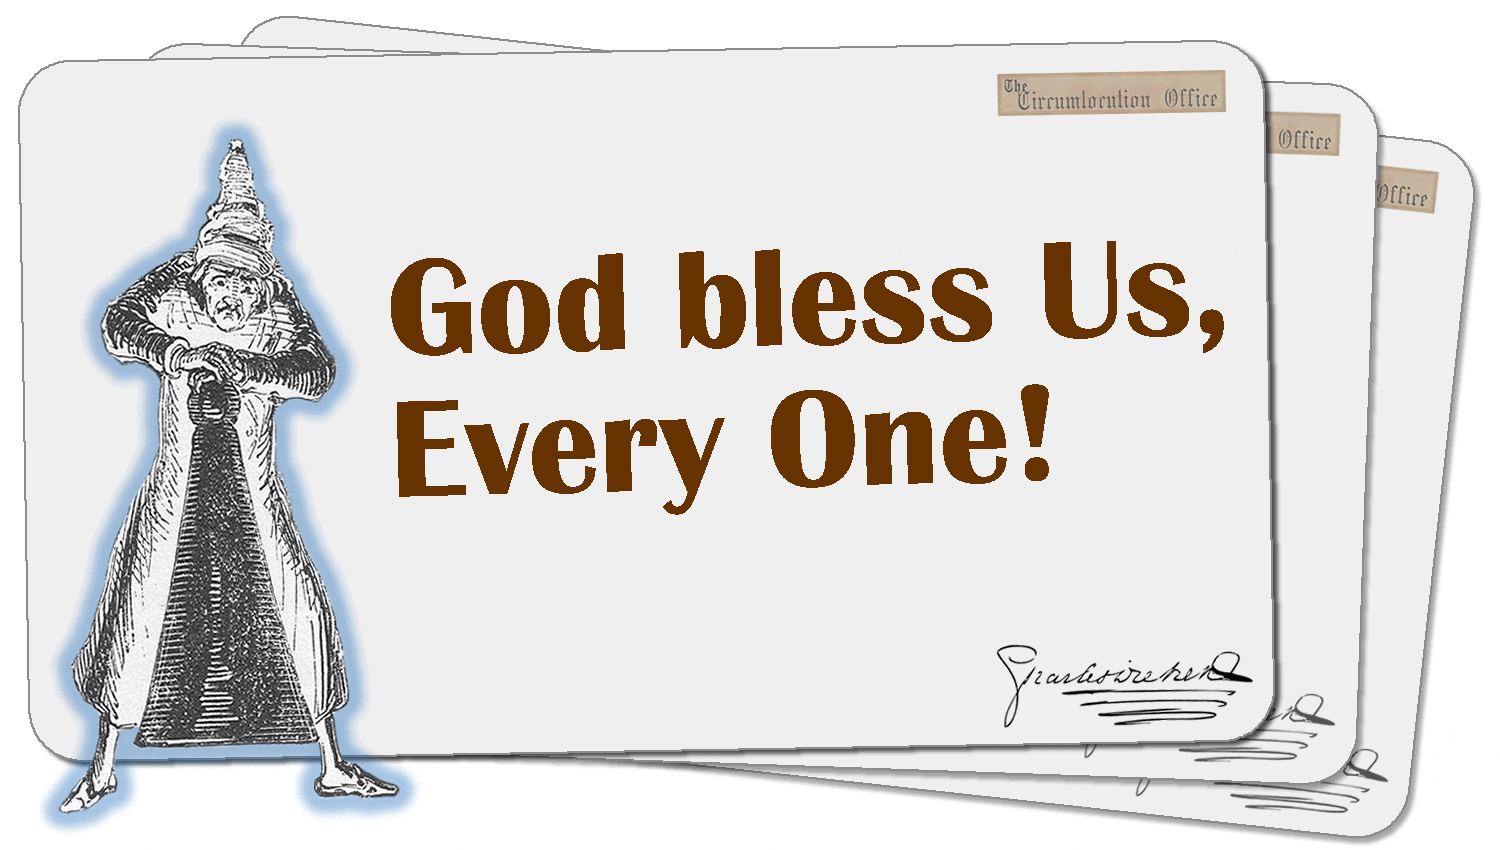 God bless Us, Every One!